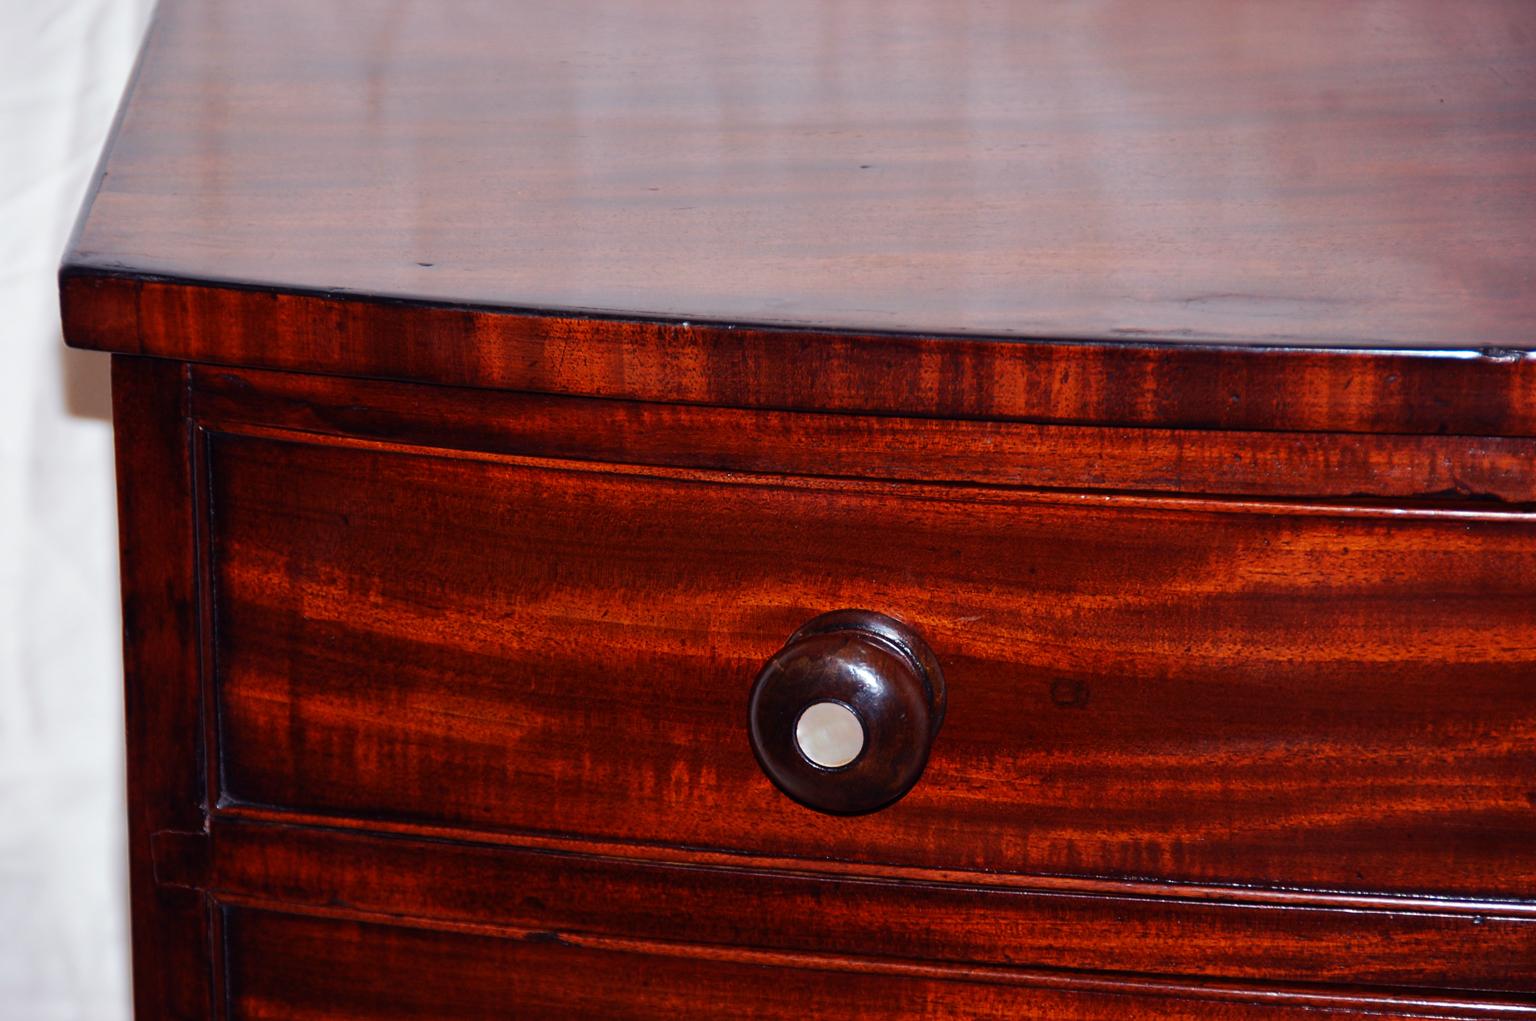 English Regency period mahogany bowfront chest of four graduated drawers. This handsome small chest retains its original mahogany knobs with mother of pearl inlaid centers, french feet and shaped skirt. The quality of the timber and craftsmanship